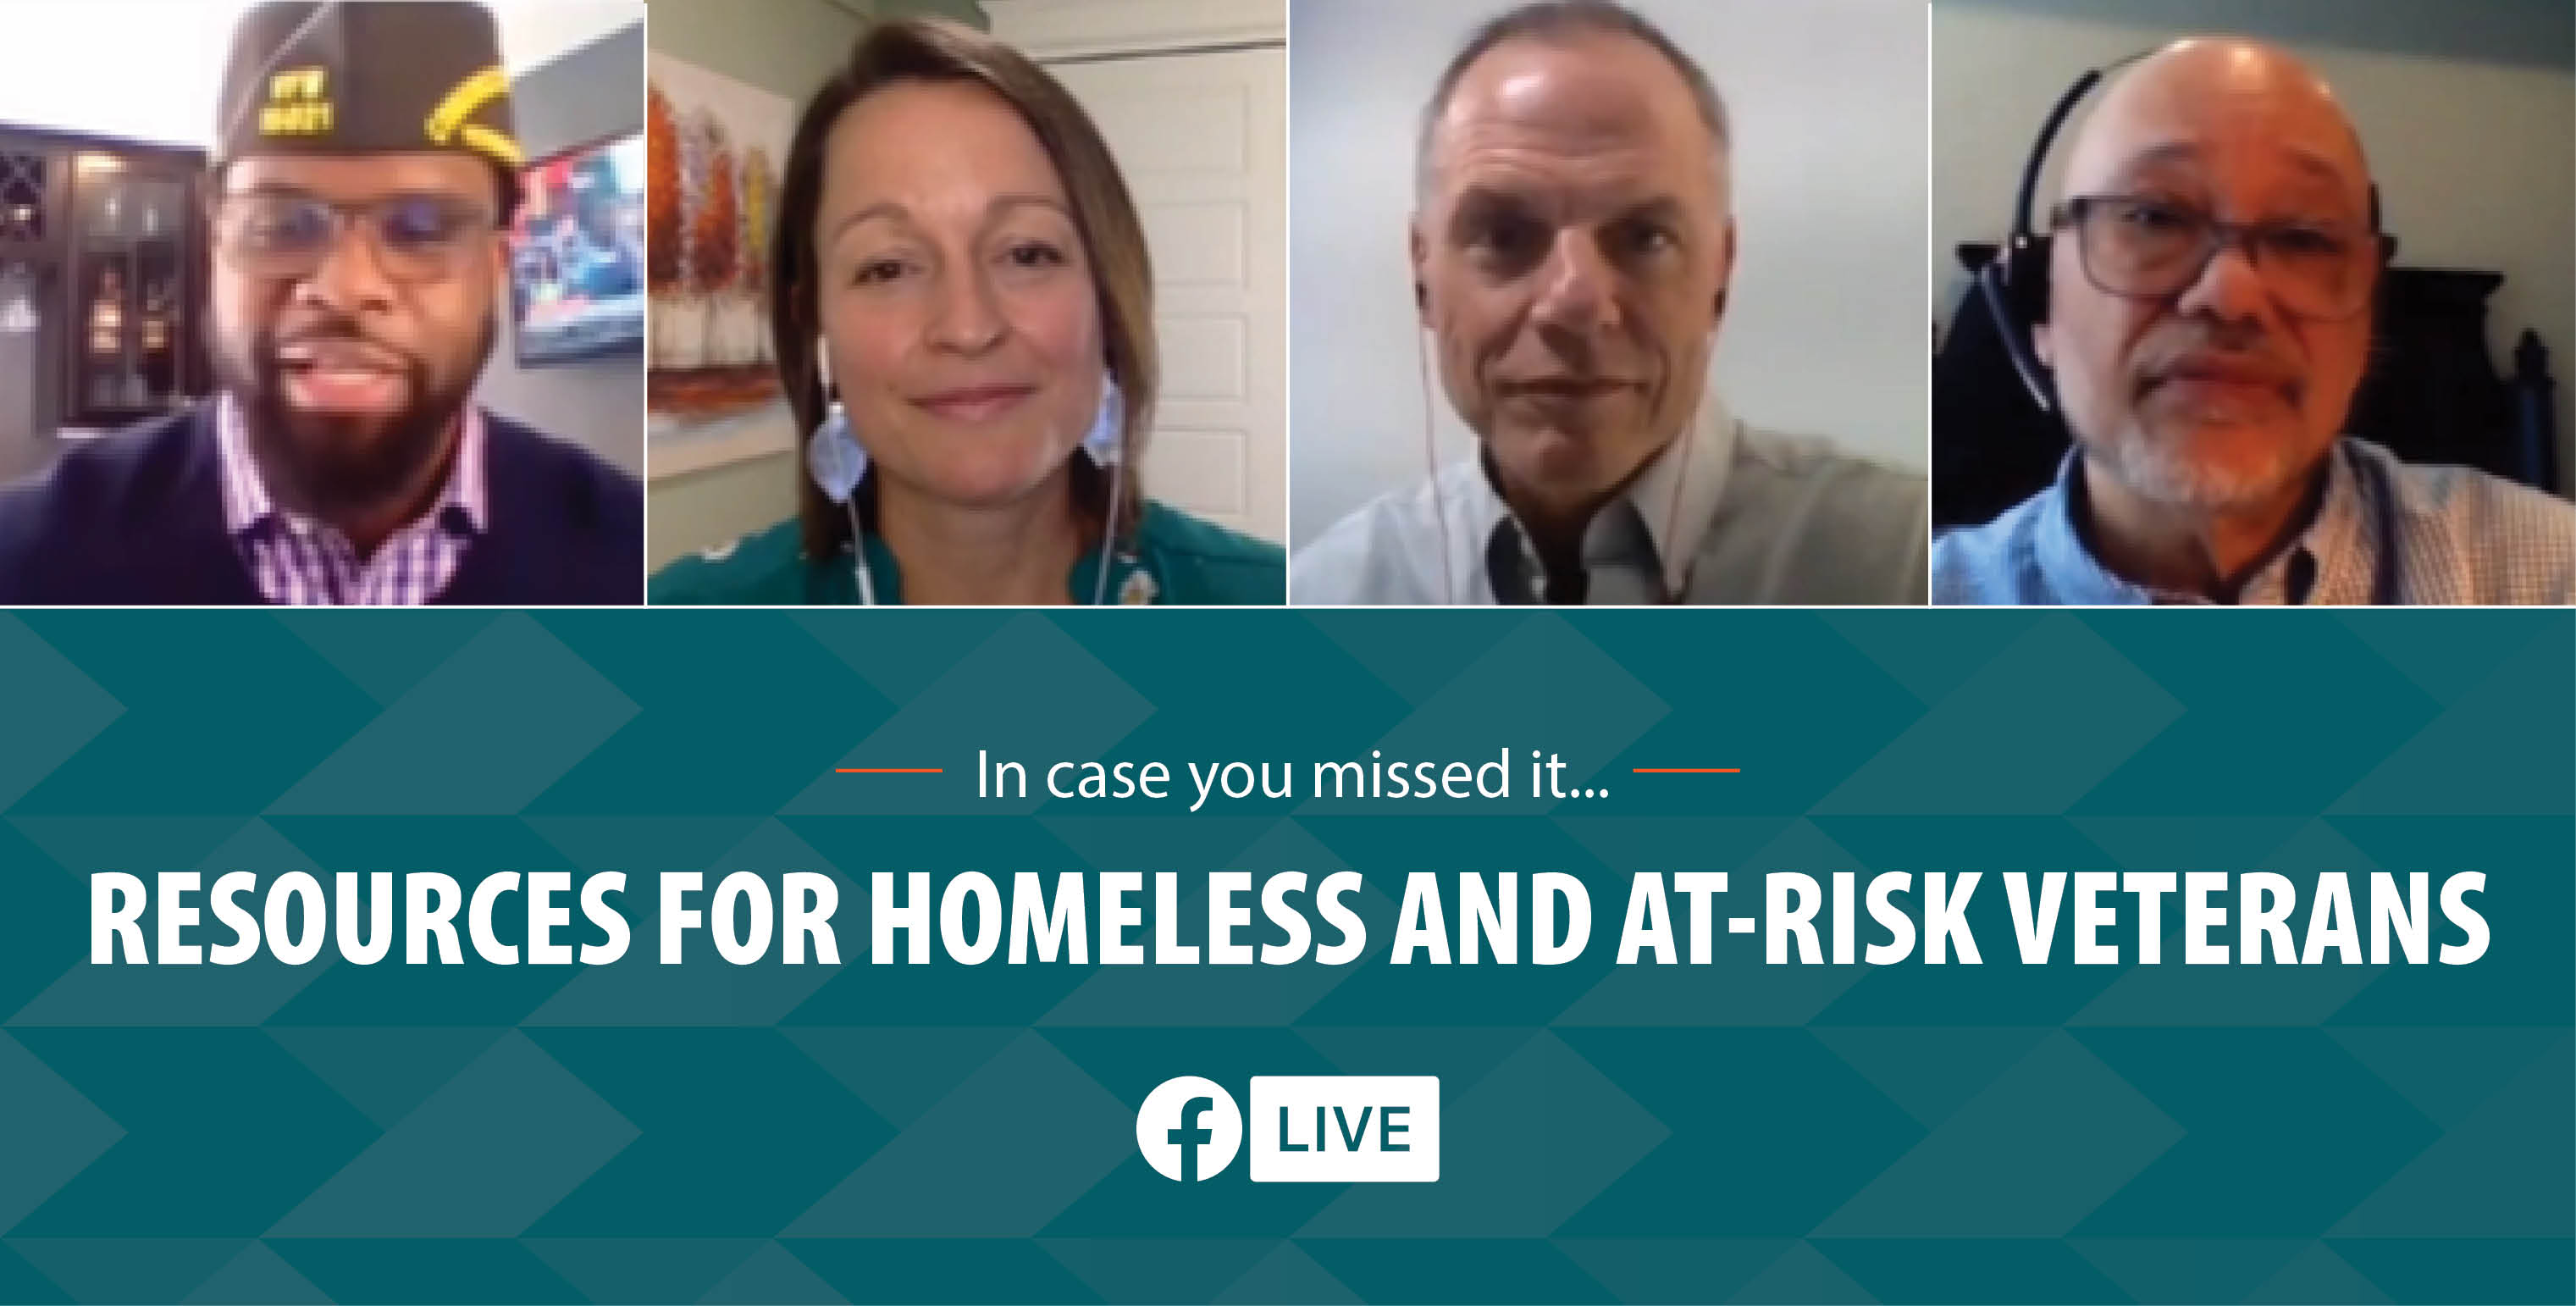 VA and VFW FB Live on homeless resources during pandemic